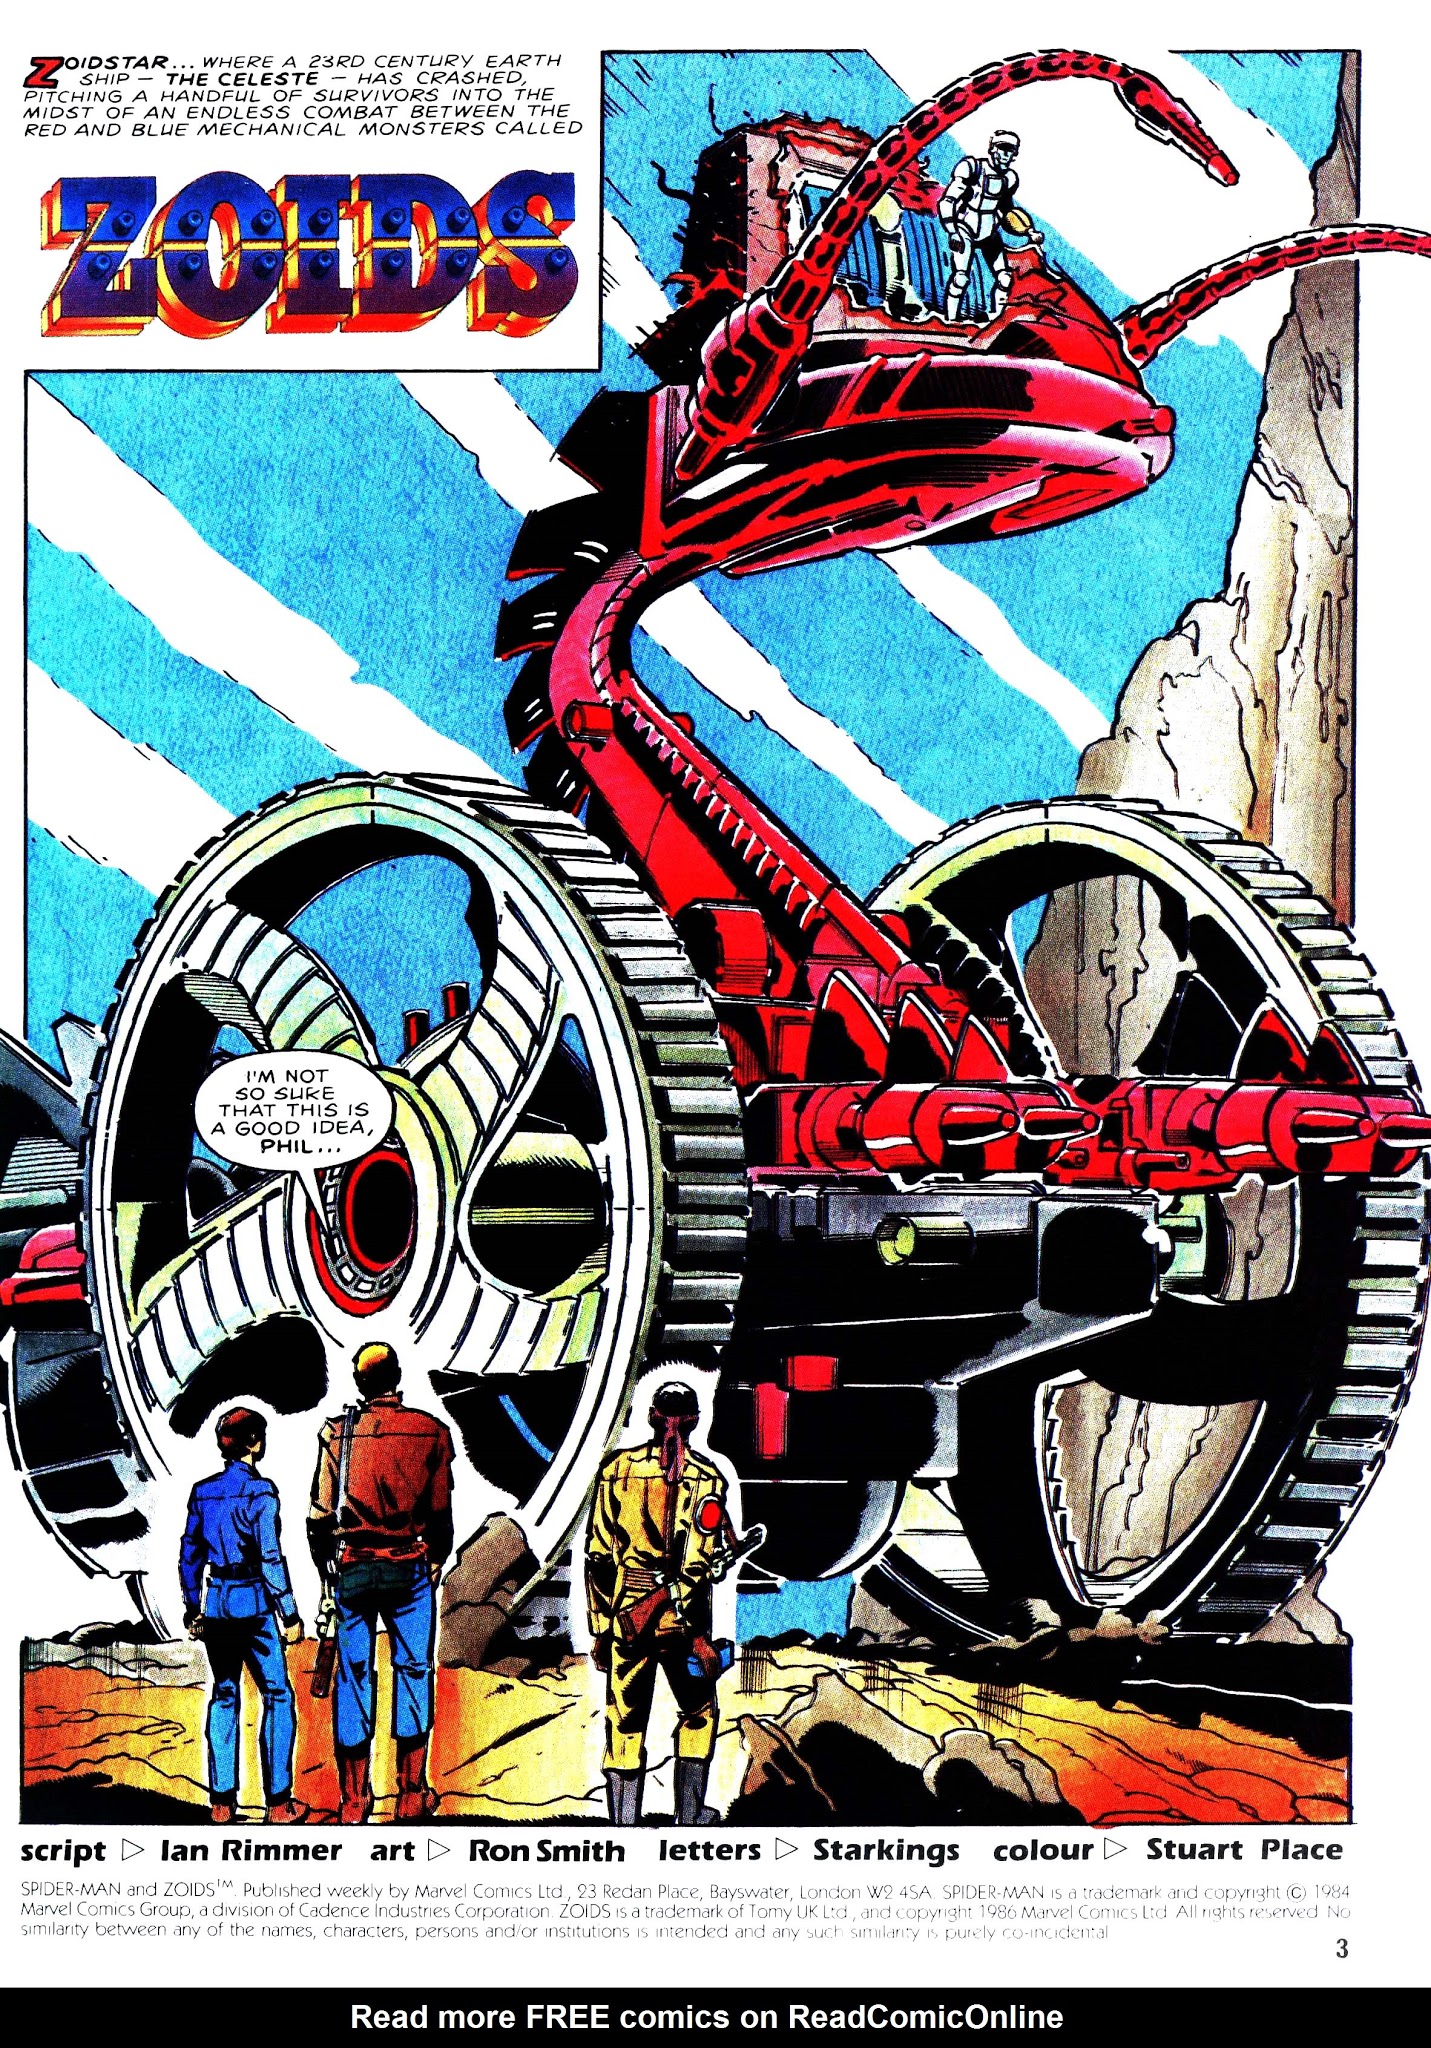 Read online Spider-Man and Zoids comic -  Issue #28 - 3